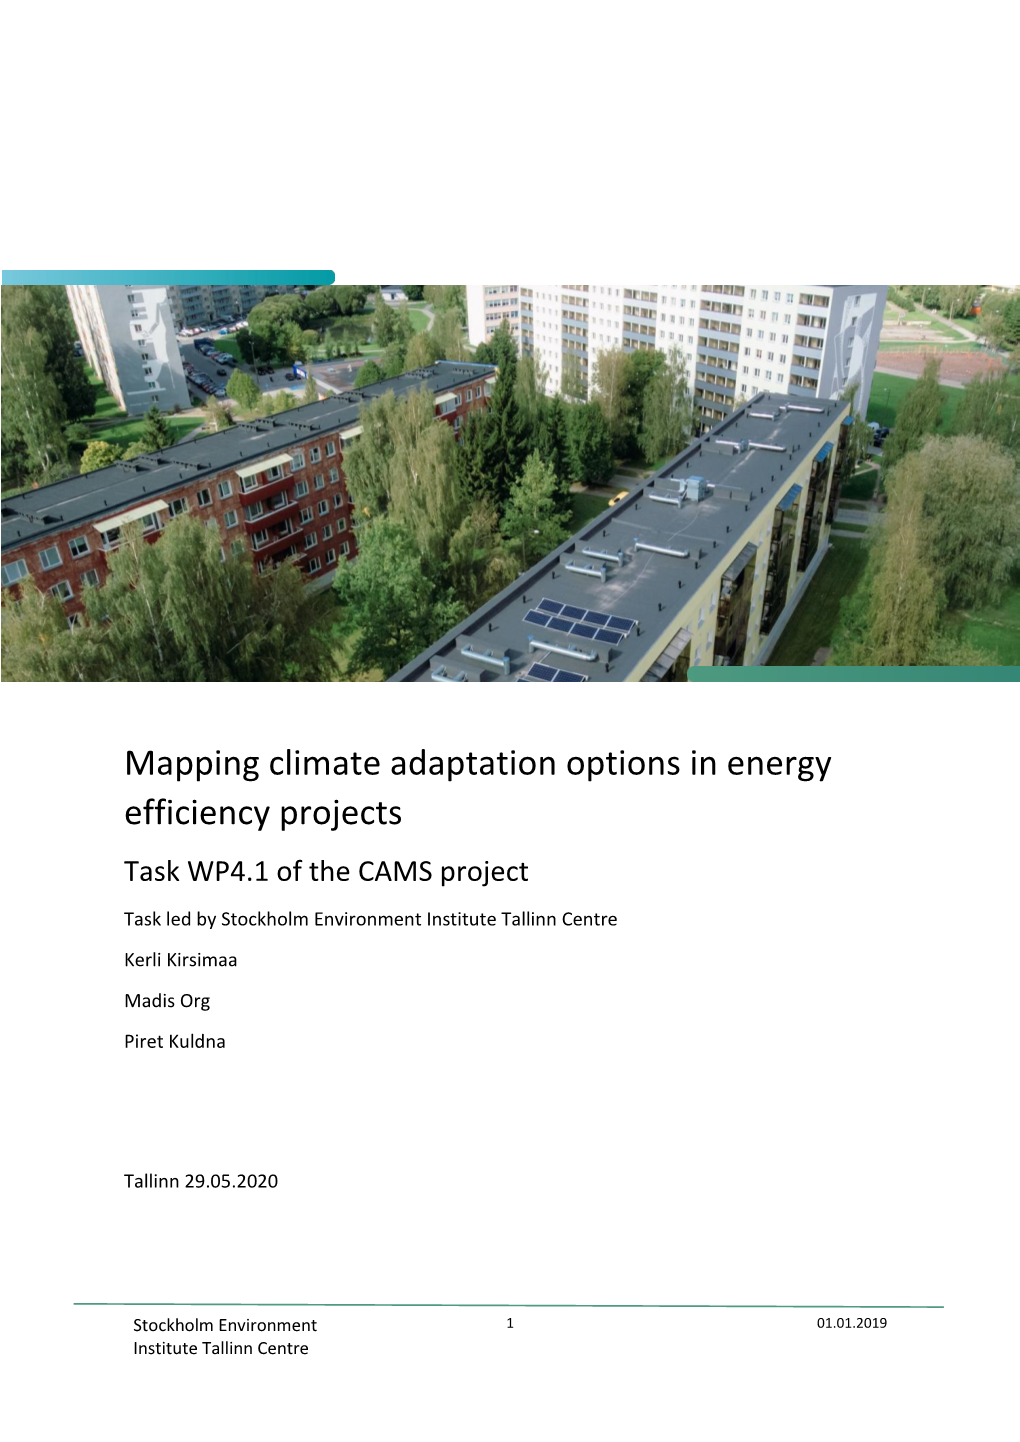 Mapping Climate Adaptation Options in Energy Efficiency Projects Task WP4.1 of the CAMS Project